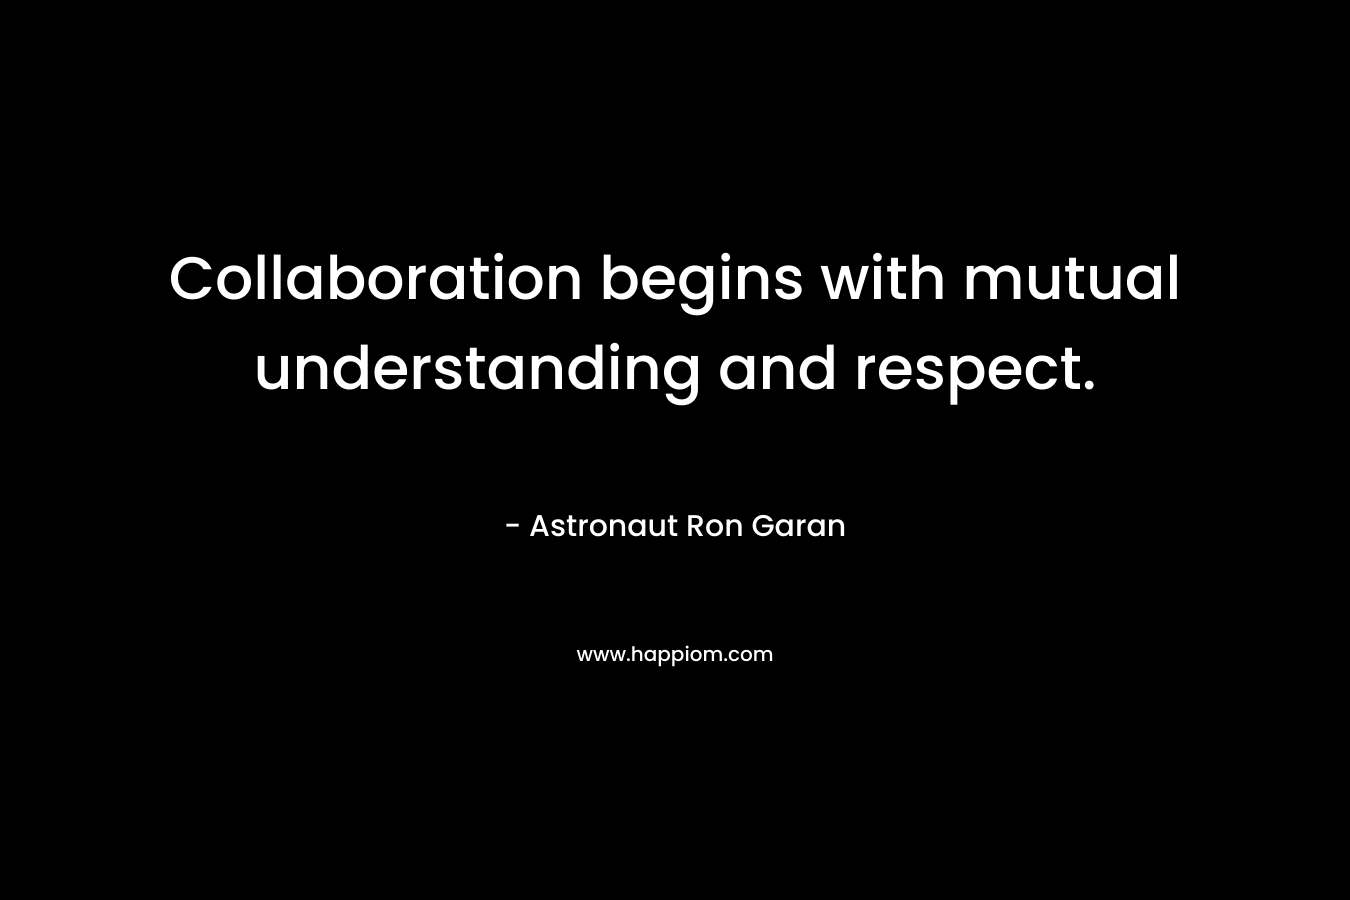 Collaboration begins with mutual understanding and respect.